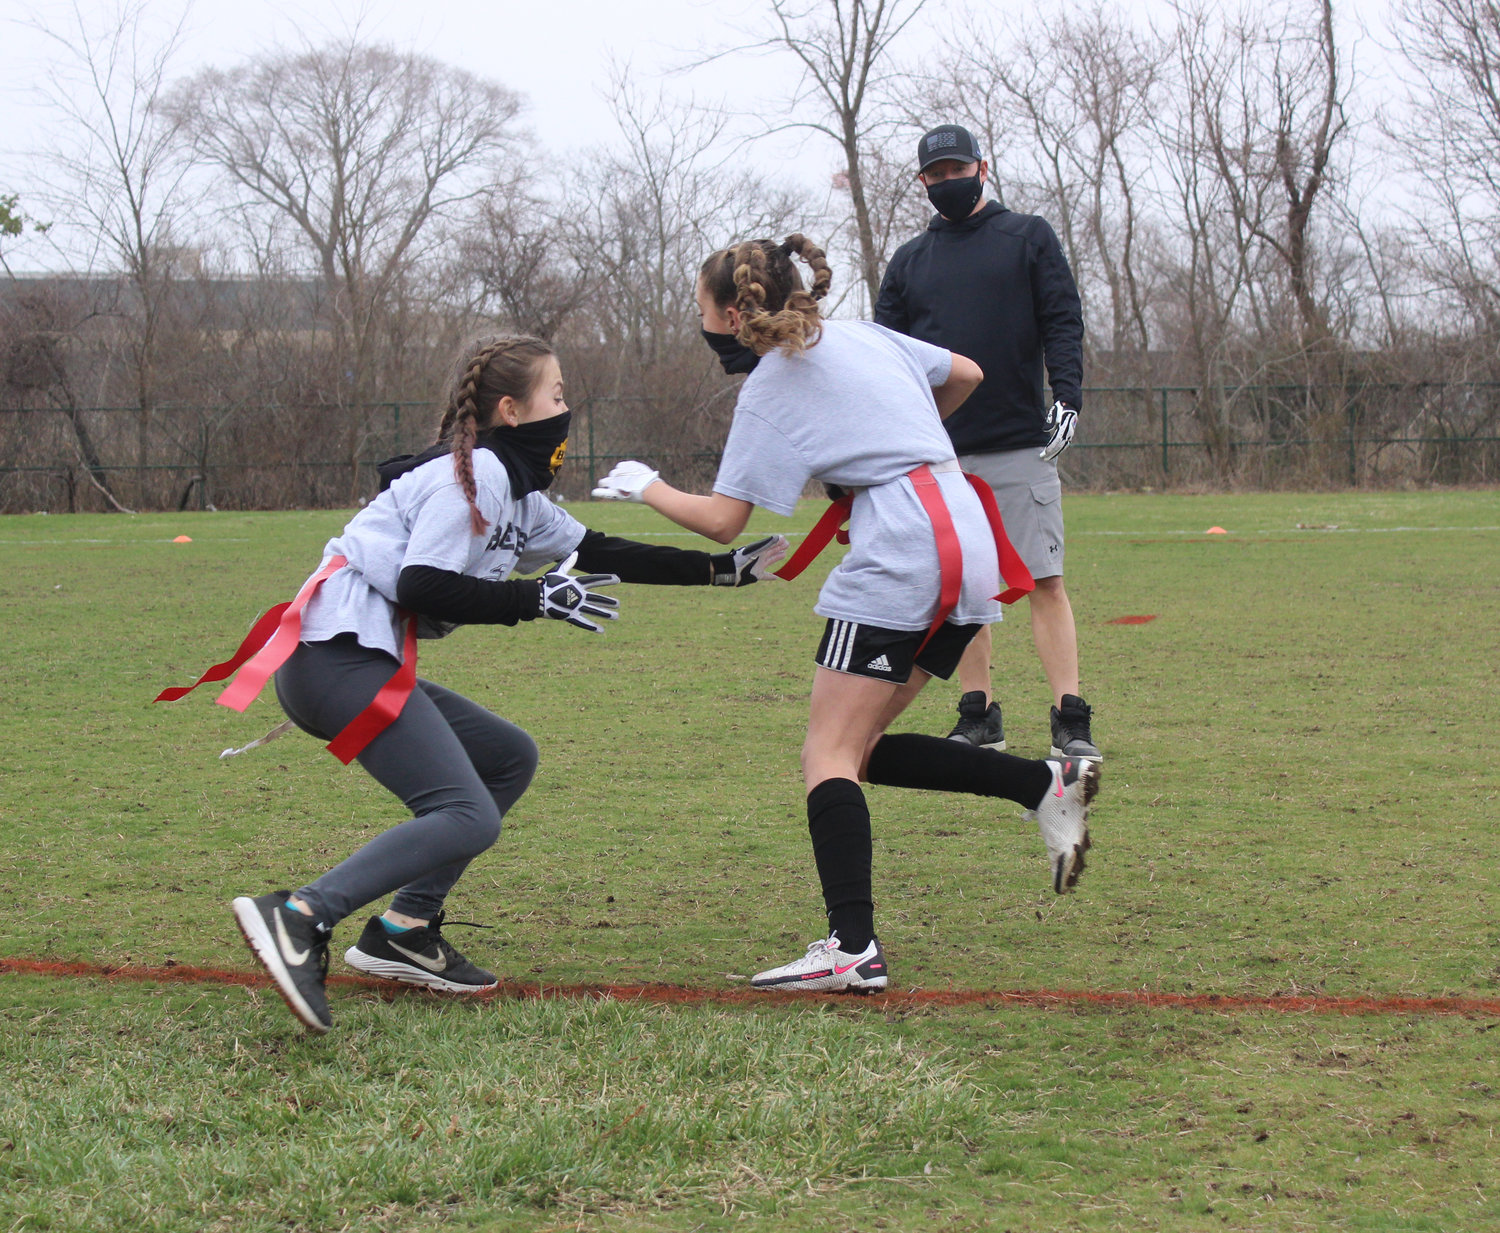 The first all-girls team in the HTB Flag Football League practiced at Cedar Creek Park on March 25, with Assistant Coach Bobby Burgess leading them through drills. Above, Juliet Roth and Kelly Harrington attempted to pull each other’s flags.